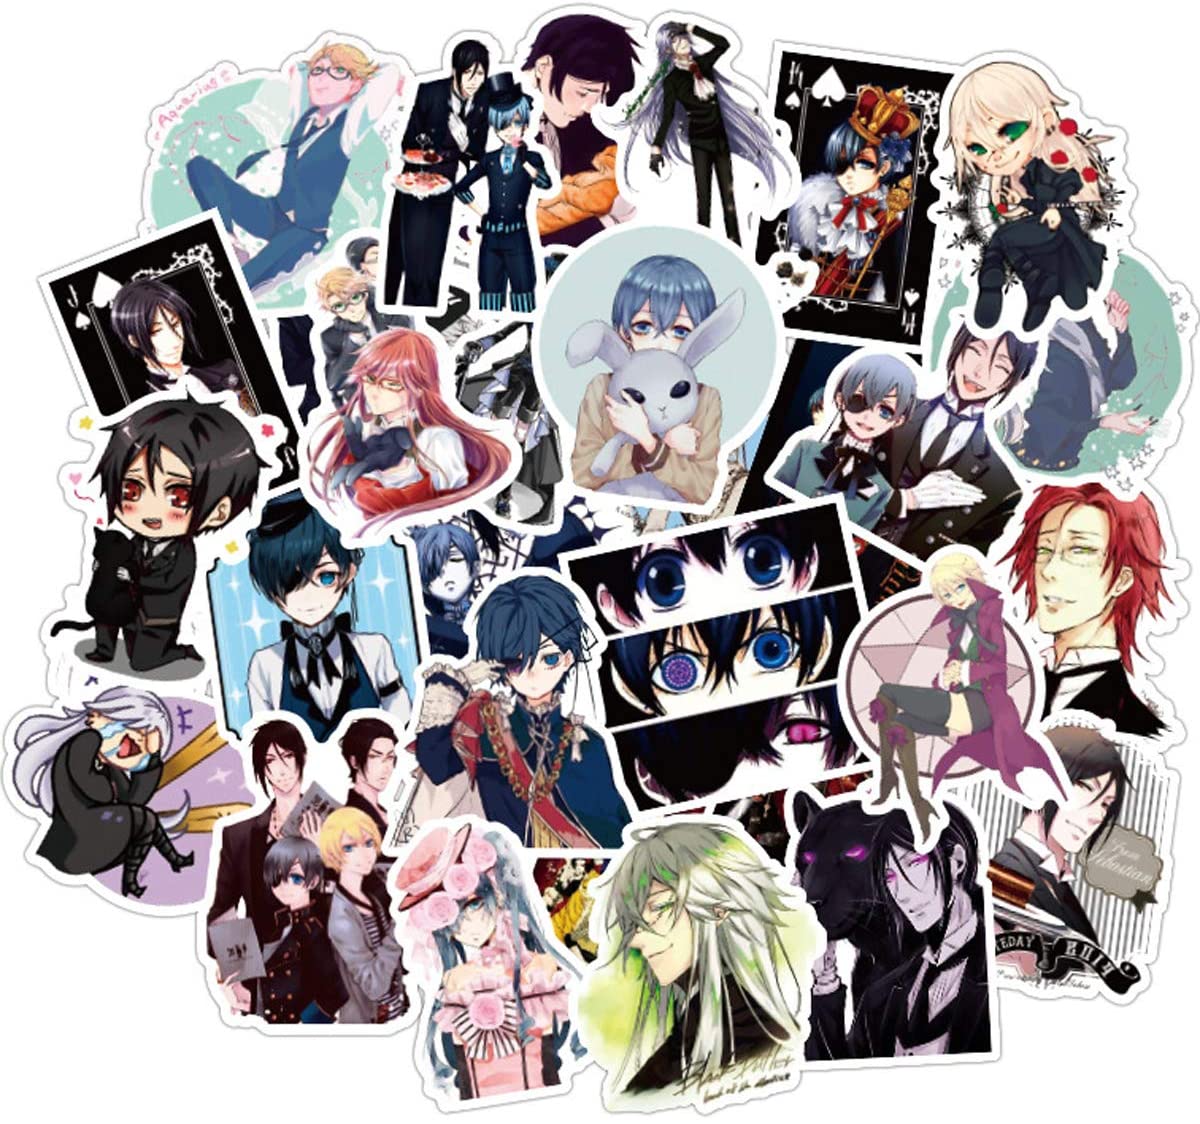 Black Butler Stickers for Water Bottles 50 Pack Cute, Waterproof, Aesthetic, Trendy Stickers for Teens, Girls Perfect for Waterbottle, Laptop, Phone, Travel Extra Durable Vinyl (Black Butler)